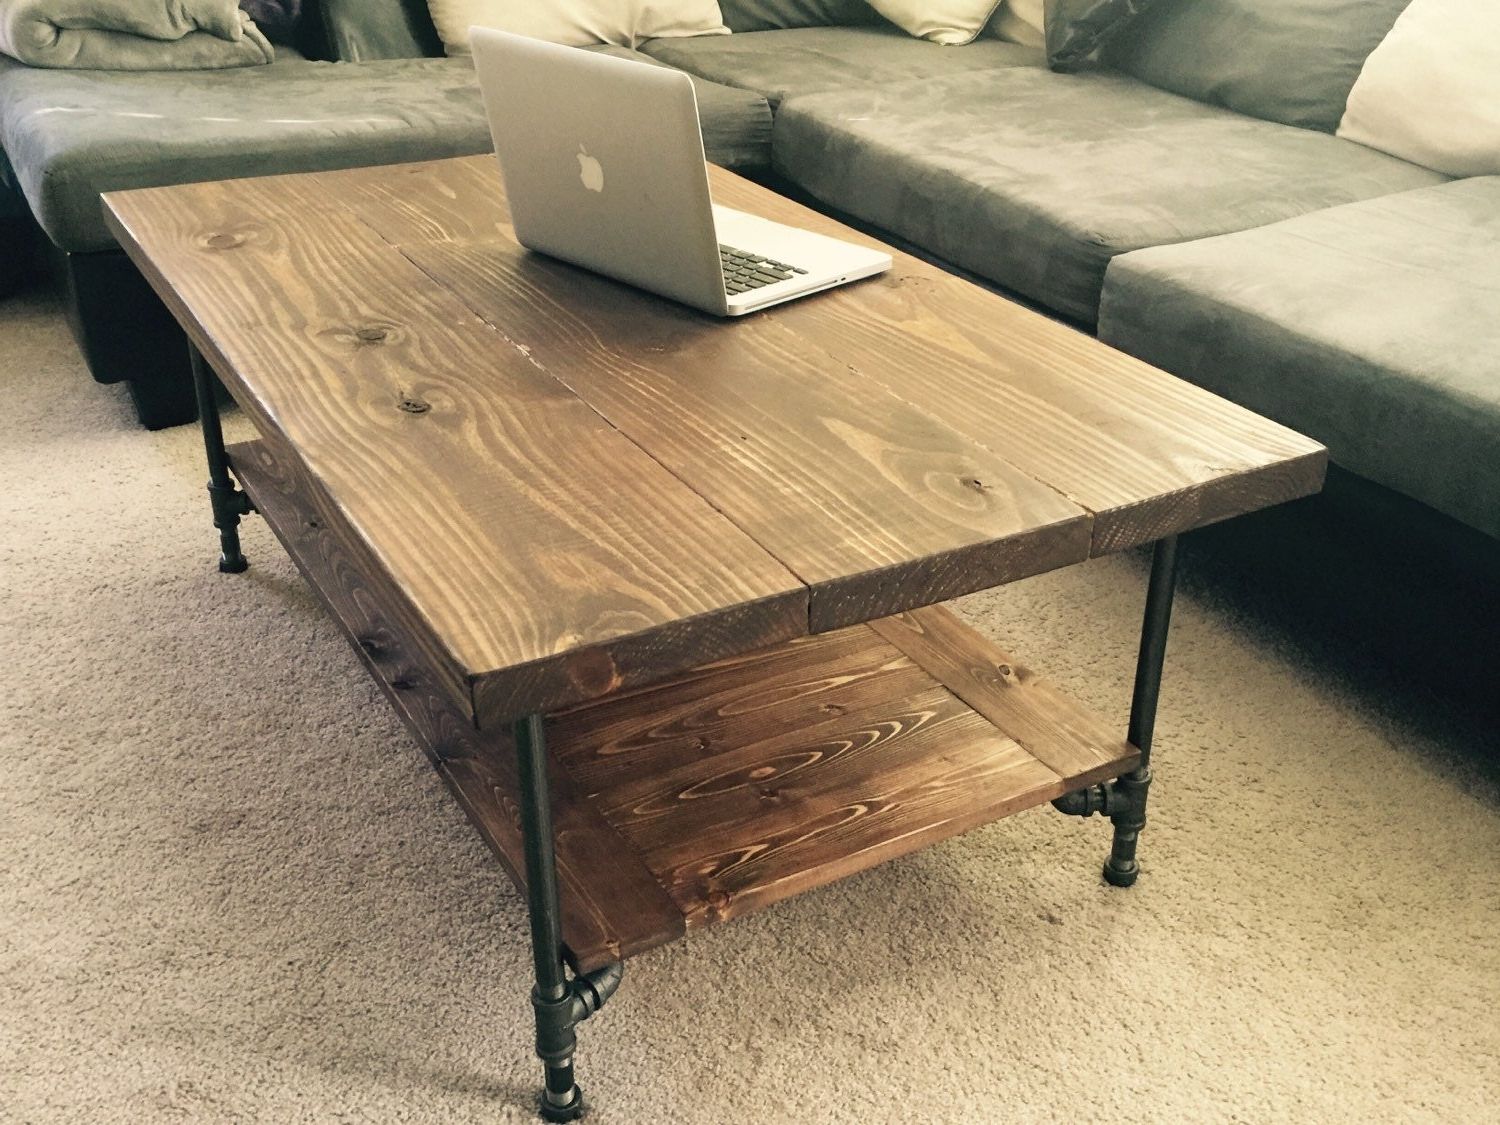 Large Industrial Rustic Wood Pipe Coffee Table With Current Rustic Espresso Wood Coffee Tables (View 5 of 20)